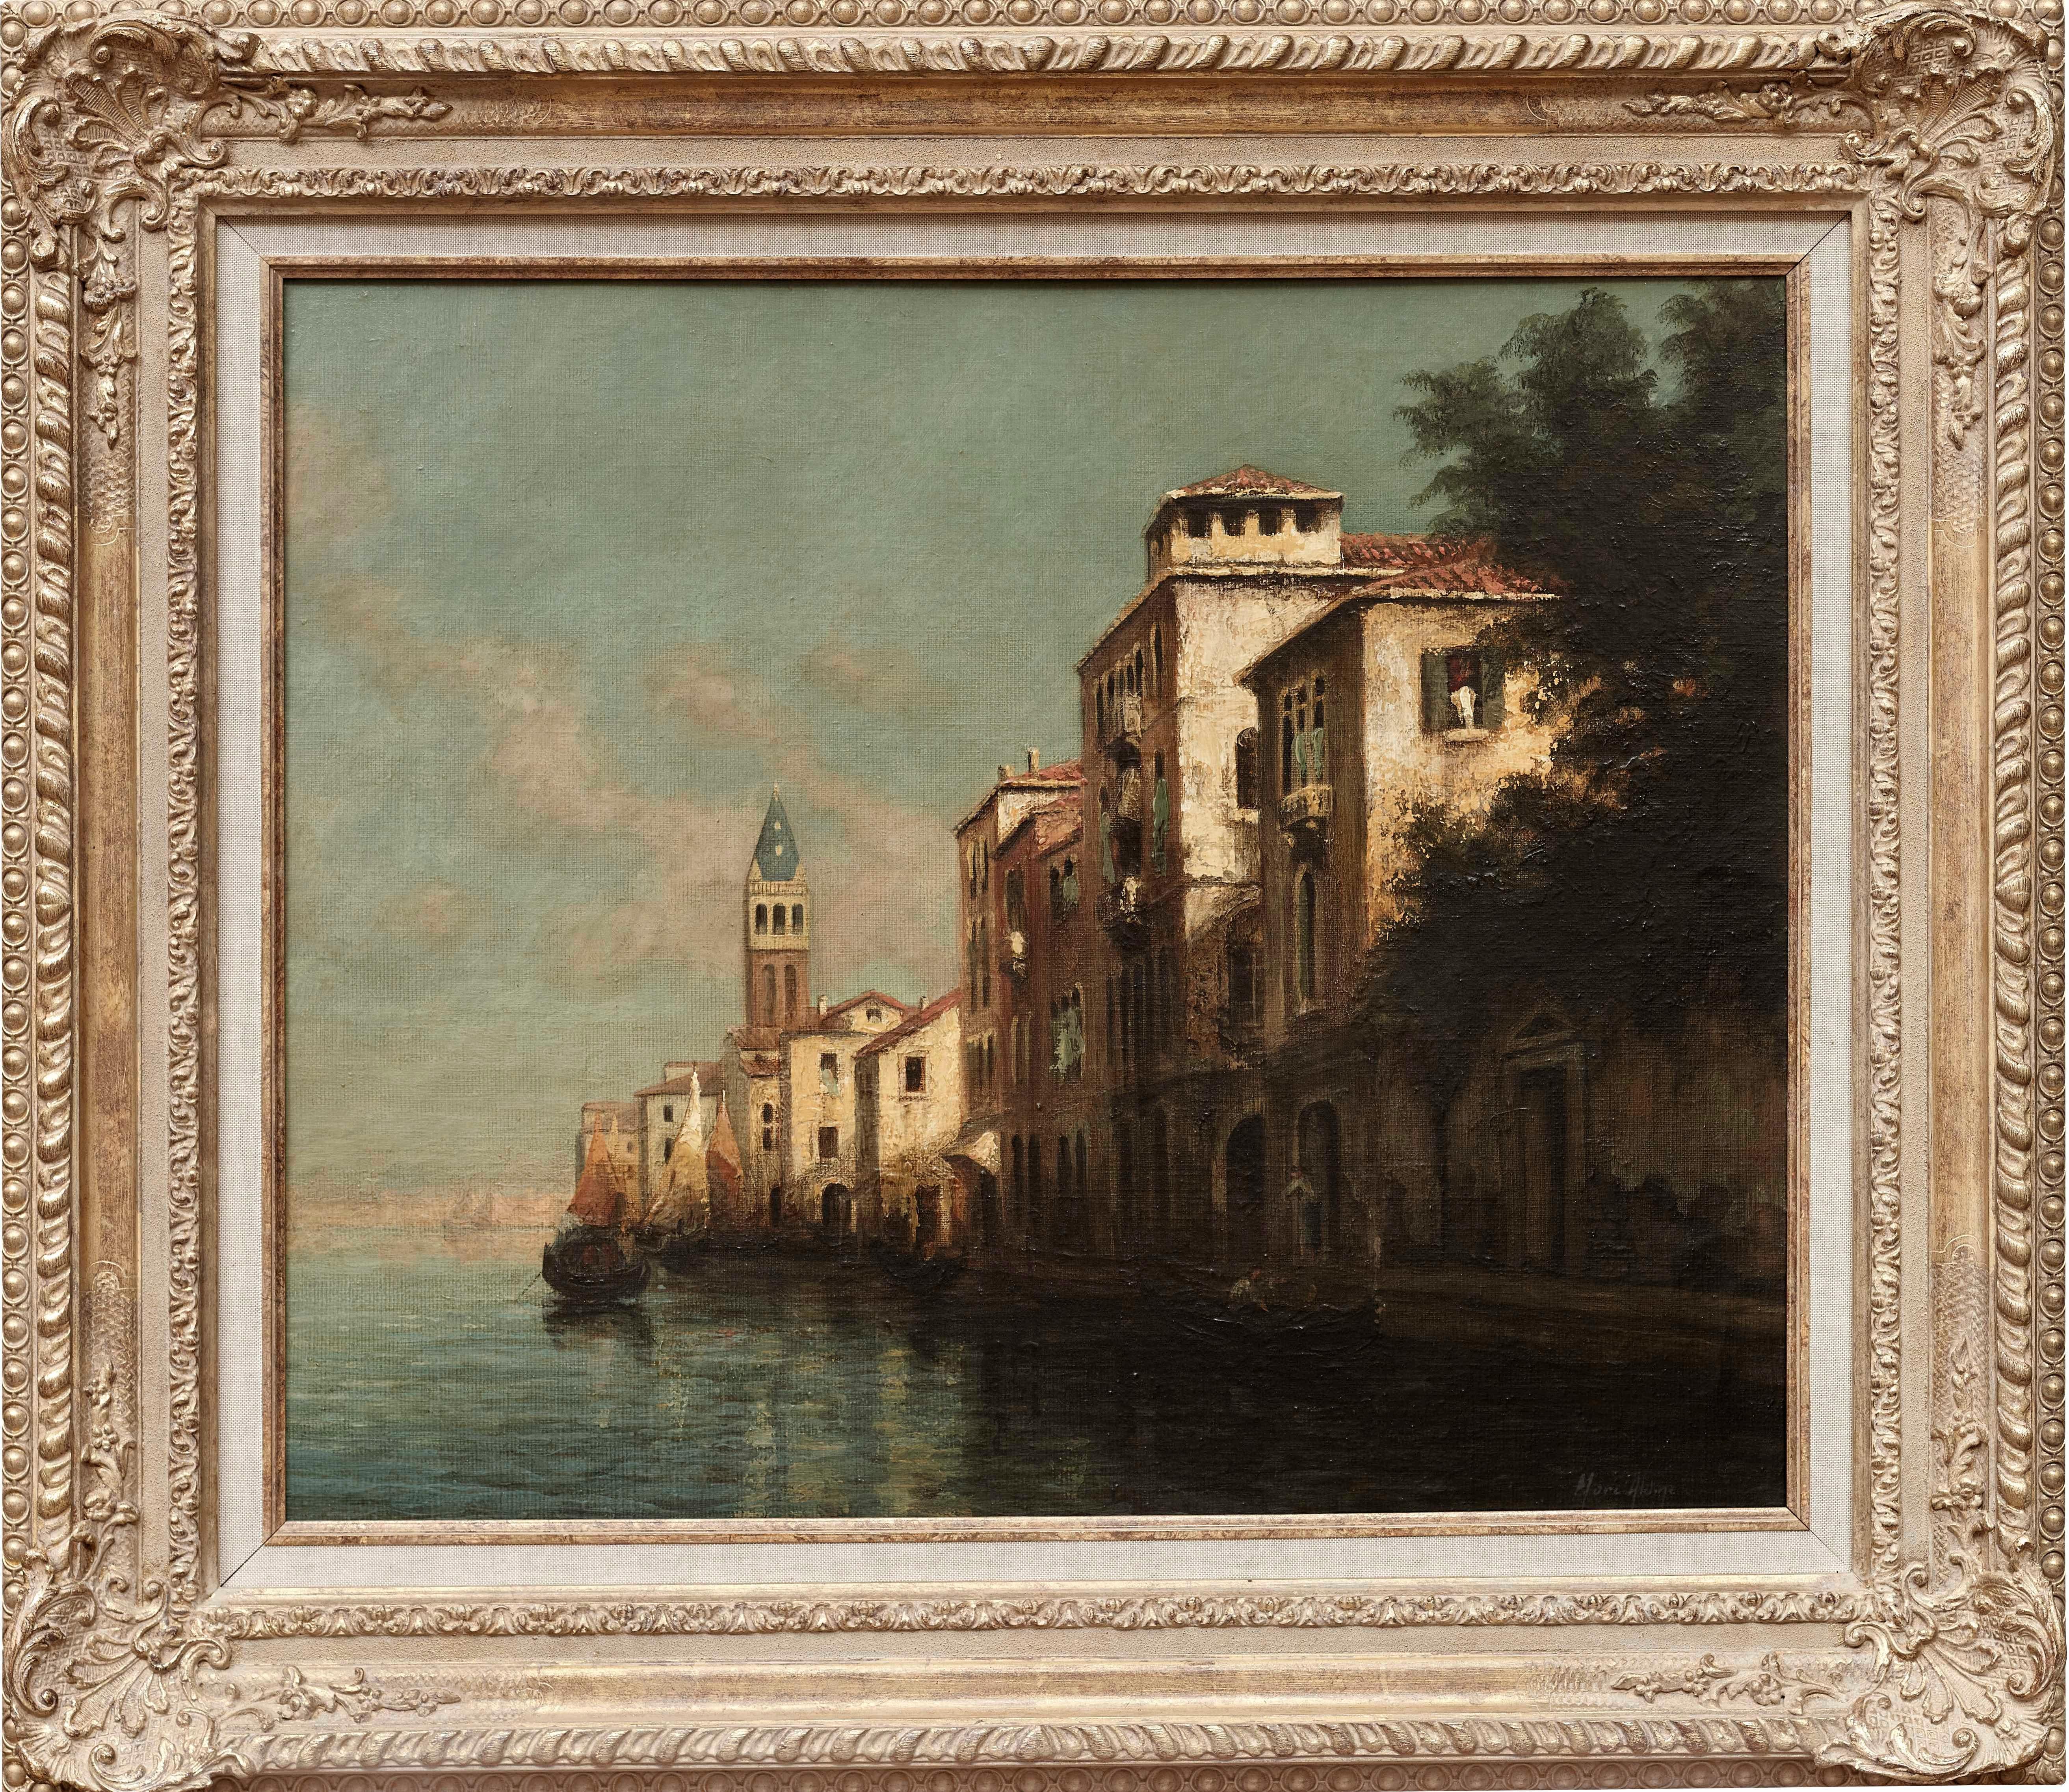 Venetian Landscape of Buildings, gondola and Canal. Venice 'Evening Glow' - Painting by Antoine Bouvard Snr. 